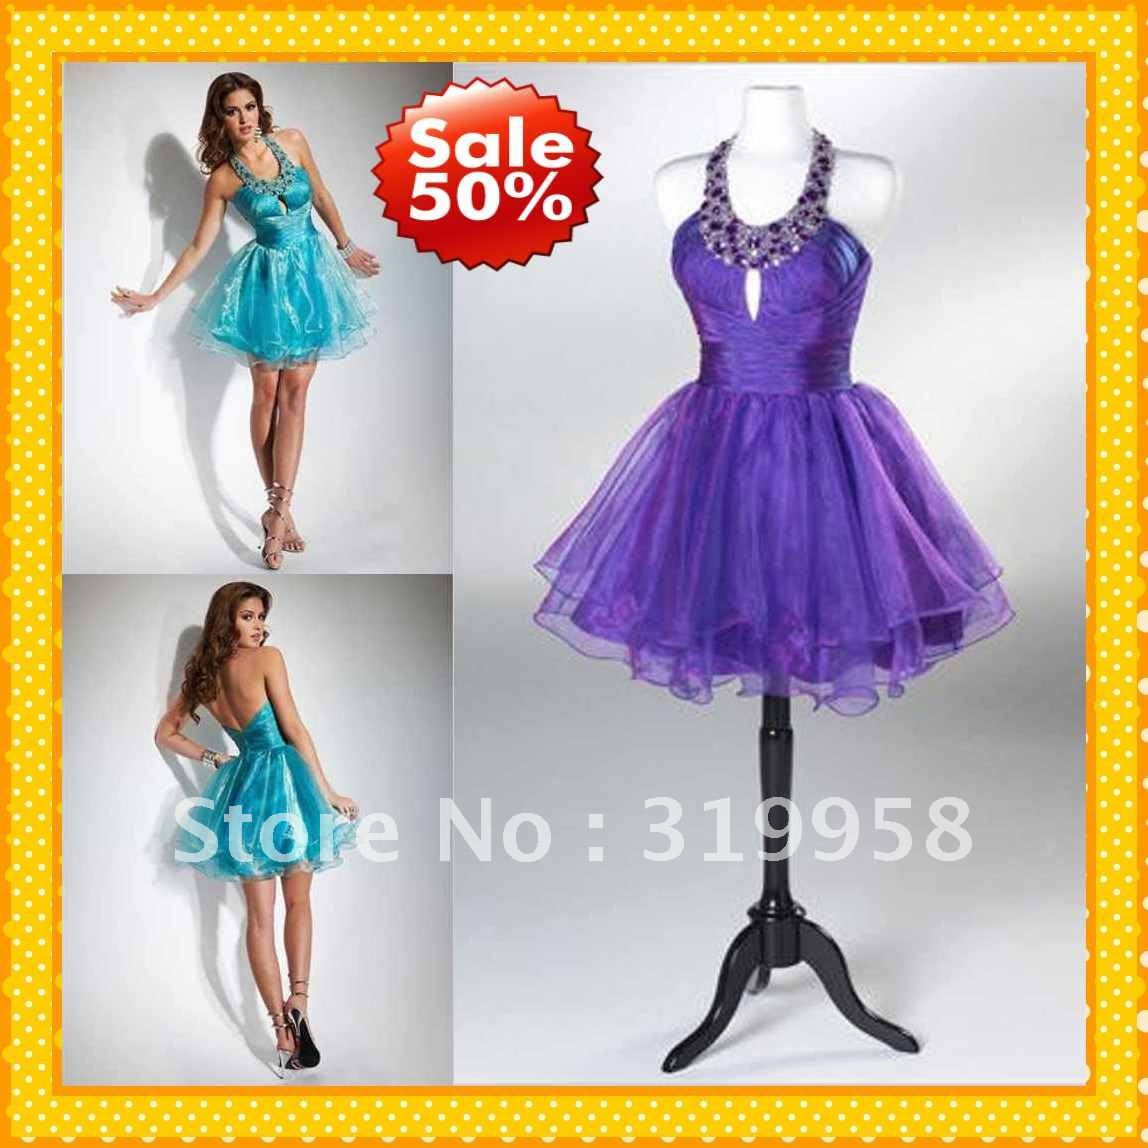 2013 Custom New Purple Halter Short Organza A-line Mini Crystals Cocktail Party Dresses Prom Homecoming Formal Gowns Dress Gown